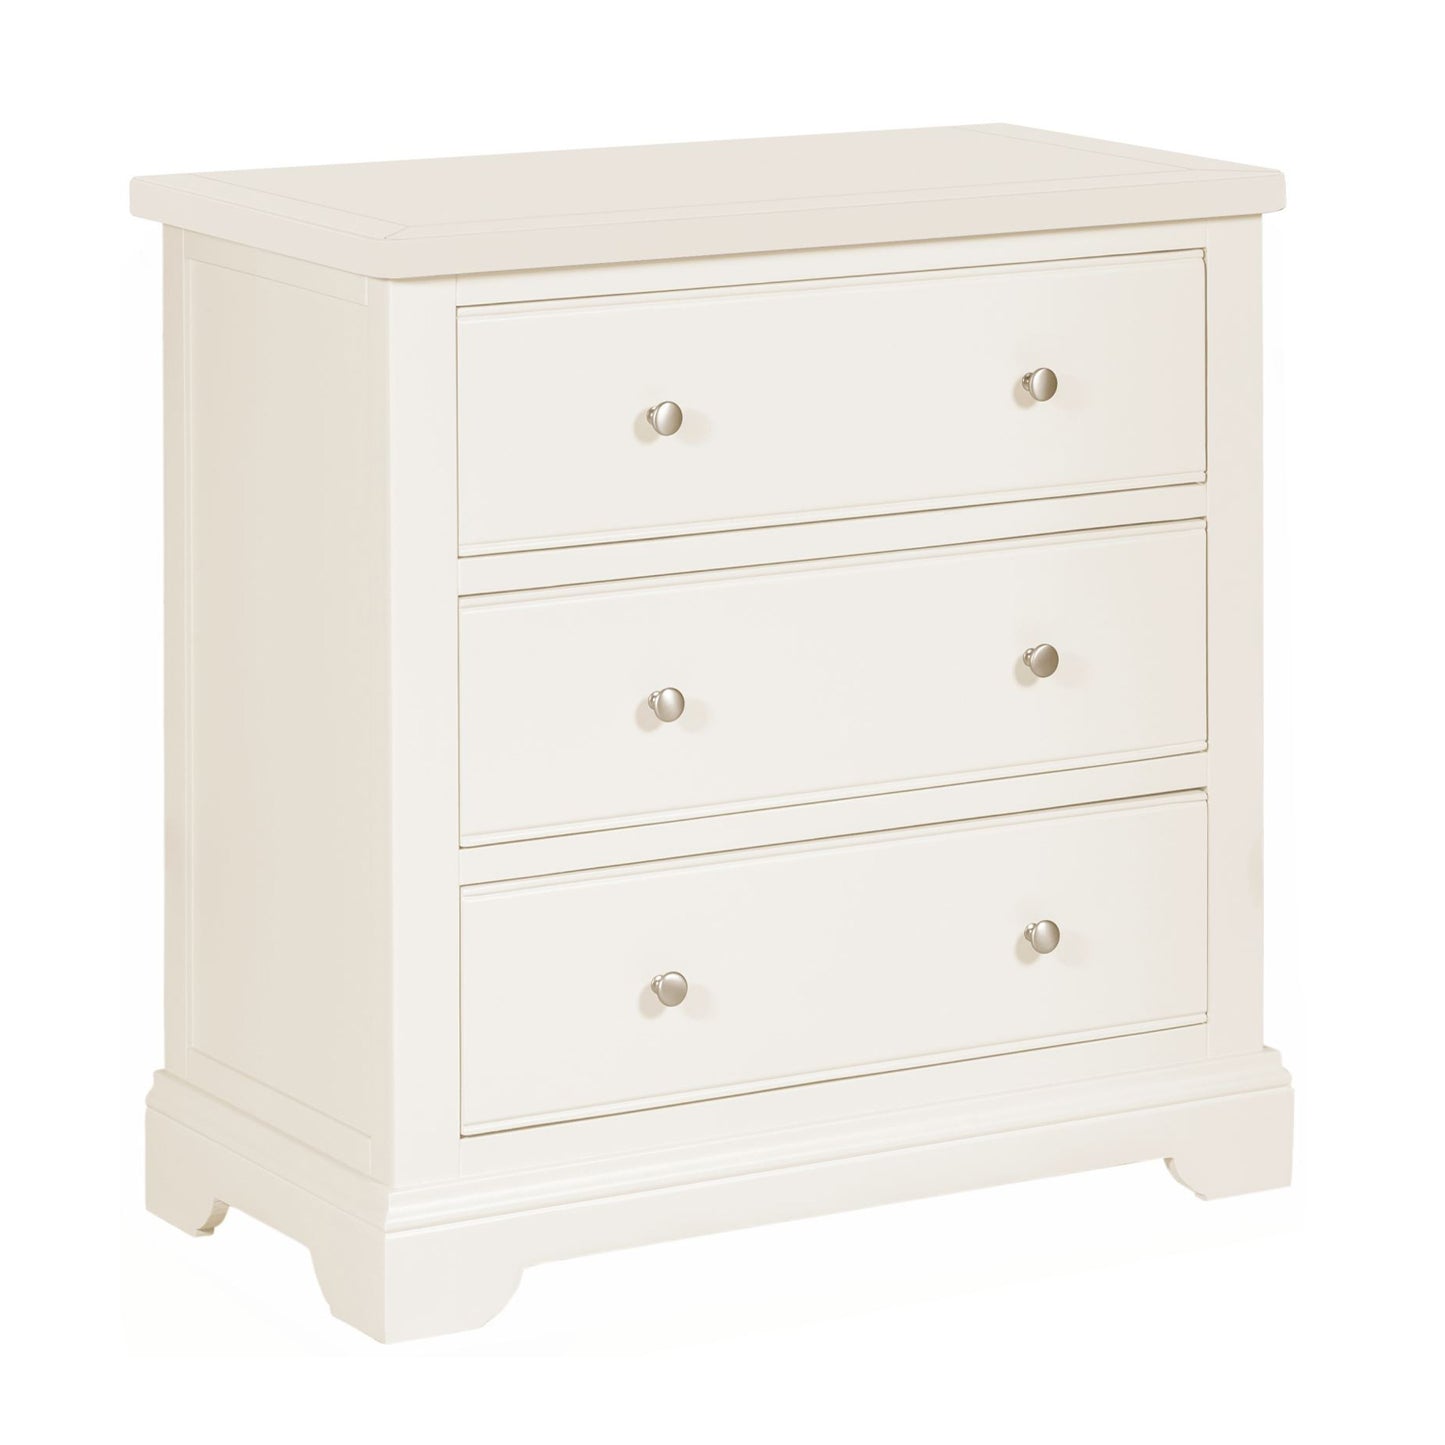 Hardingham White Painted Chest of Drawers - 3 Drawer